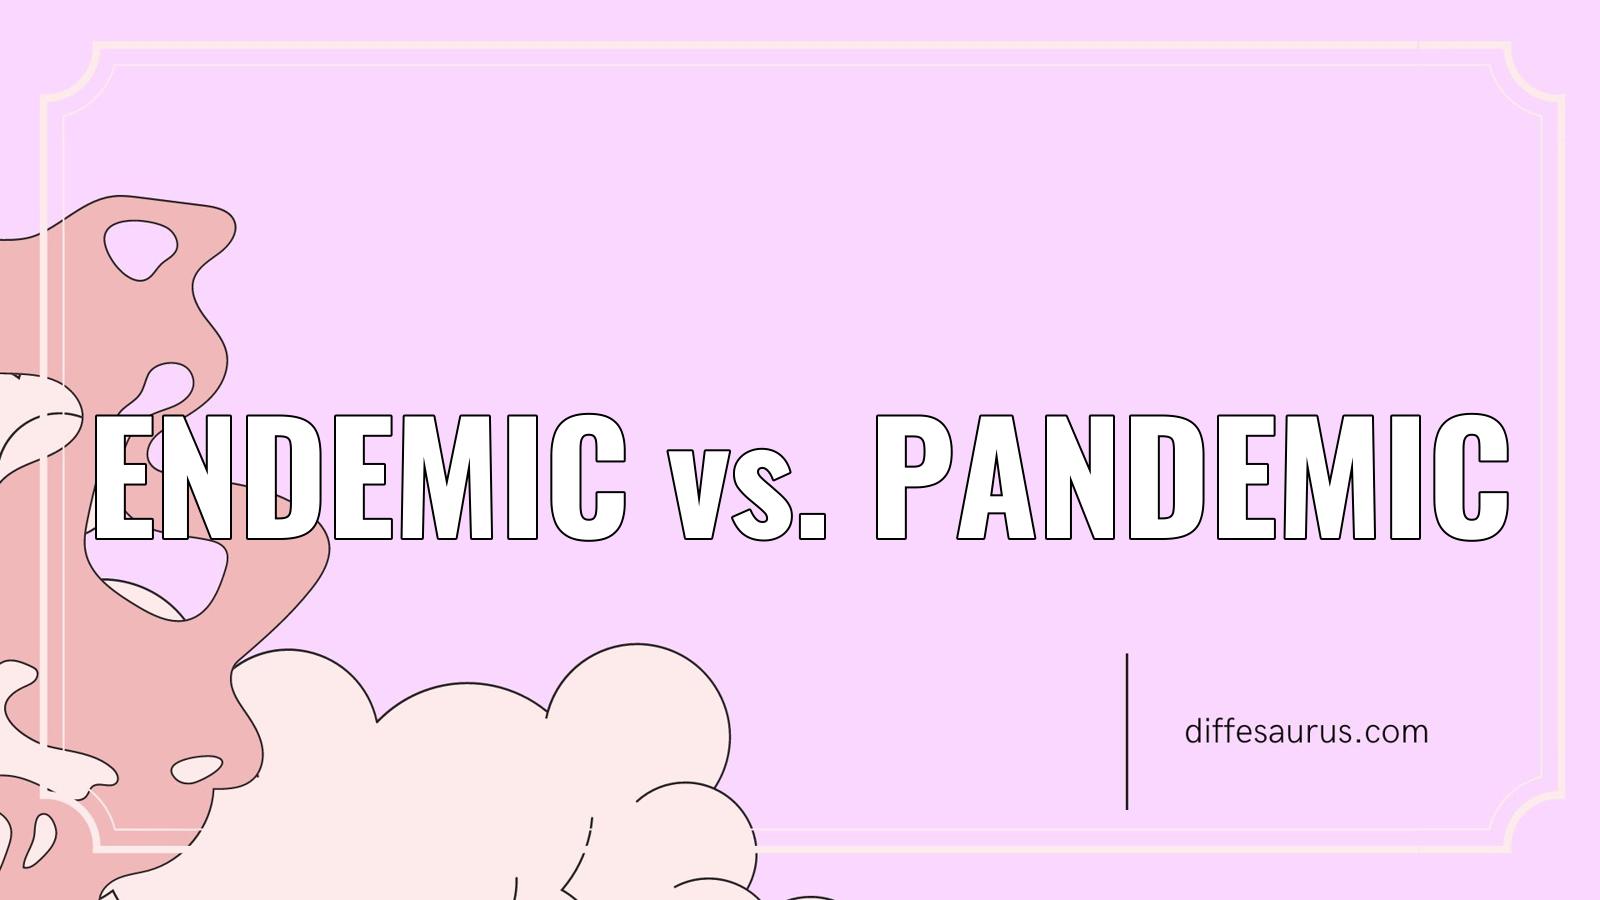 Read more about the article The Difference Between Endemic and Pandemic